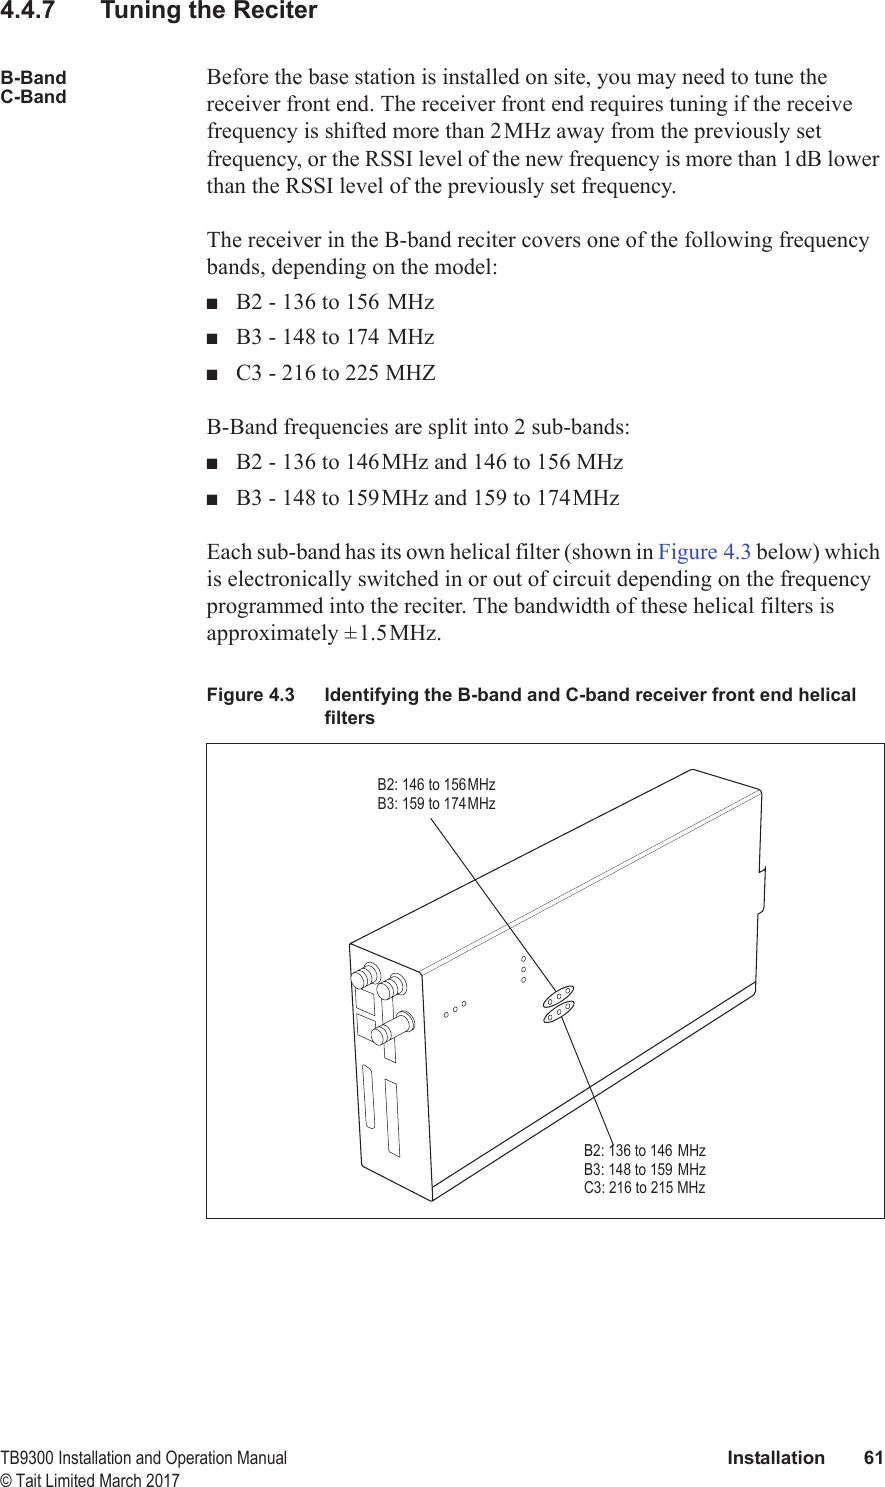  TB9300 Installation and Operation Manual Installation 61© Tait Limited March 20174.4.7 Tuning the ReciterB-BandC-BandBefore the base station is installed on site, you may need to tune the receiver front end. The receiver front end requires tuning if the receive frequency is shifted more than 2MHz away from the previously set frequency, or the RSSI level of the new frequency is more than 1dB lower than the RSSI level of the previously set frequency.The receiver in the B-band reciter covers one of the following frequency bands, depending on the model:■B2 - 136 to 156 MHz■B3 - 148 to 174 MHz■C3 - 216 to 225 MHZB-Band frequencies are split into 2 sub-bands:■B2 - 136 to 146MHz and 146 to 156 MHz■B3 - 148 to 159MHz and 159 to 174MHzEach sub-band has its own helical filter (shown in Figure 4.3 below) which is electronically switched in or out of circuit depending on the frequency programmed into the reciter. The bandwidth of these helical filters is approximately ±1.5MHz. Figure 4.3 Identifying the B-band and C-band receiver front end helical filtersB2: 146 to 156MHzB3: 159 to 174MHzB2: 136 to 146 MHzB3: 148 to 159 MHzC3: 216 to 215 MHz